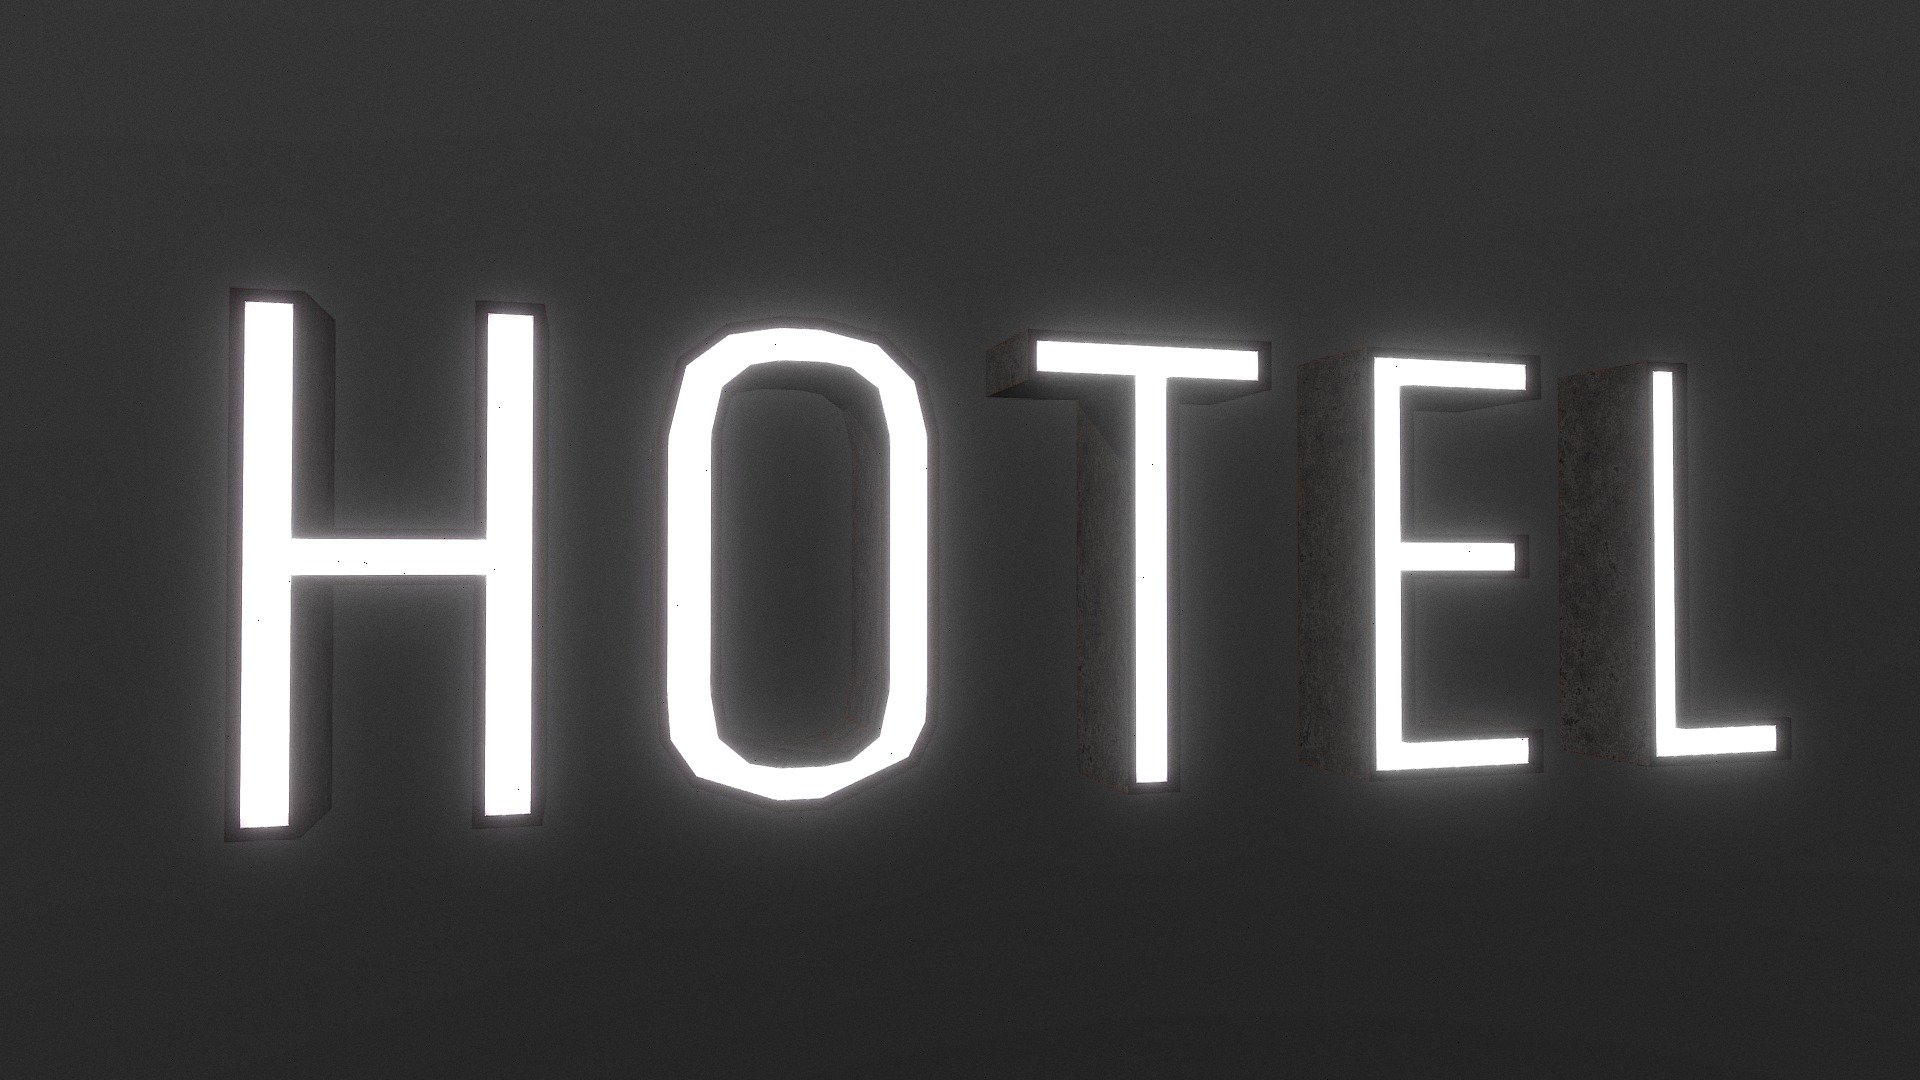 Low poly, rusty Neon Hotel 

* 2k diffuse, normal, roughness, emission

* 4 diffrent file formats - OBJ/MTL, FBX, GLB, GLTF


You can find the whole package of this type of models here:

https://sketchfab.com/3d-models/rusty-neons-signs-low-poly-pack-beeec93990d347abb56c5b35efce20e3

I hope you will enjoy my product! If you have questions about this model or you have a problem send me a message:

Artstation: https://www.artstation.com/aroba

IG: https://www.instagram.com/blue.blender.print/
 - Neon Hotel - Buy Royalty Free 3D model by @blue.blender.print (@arobaco) 3d model